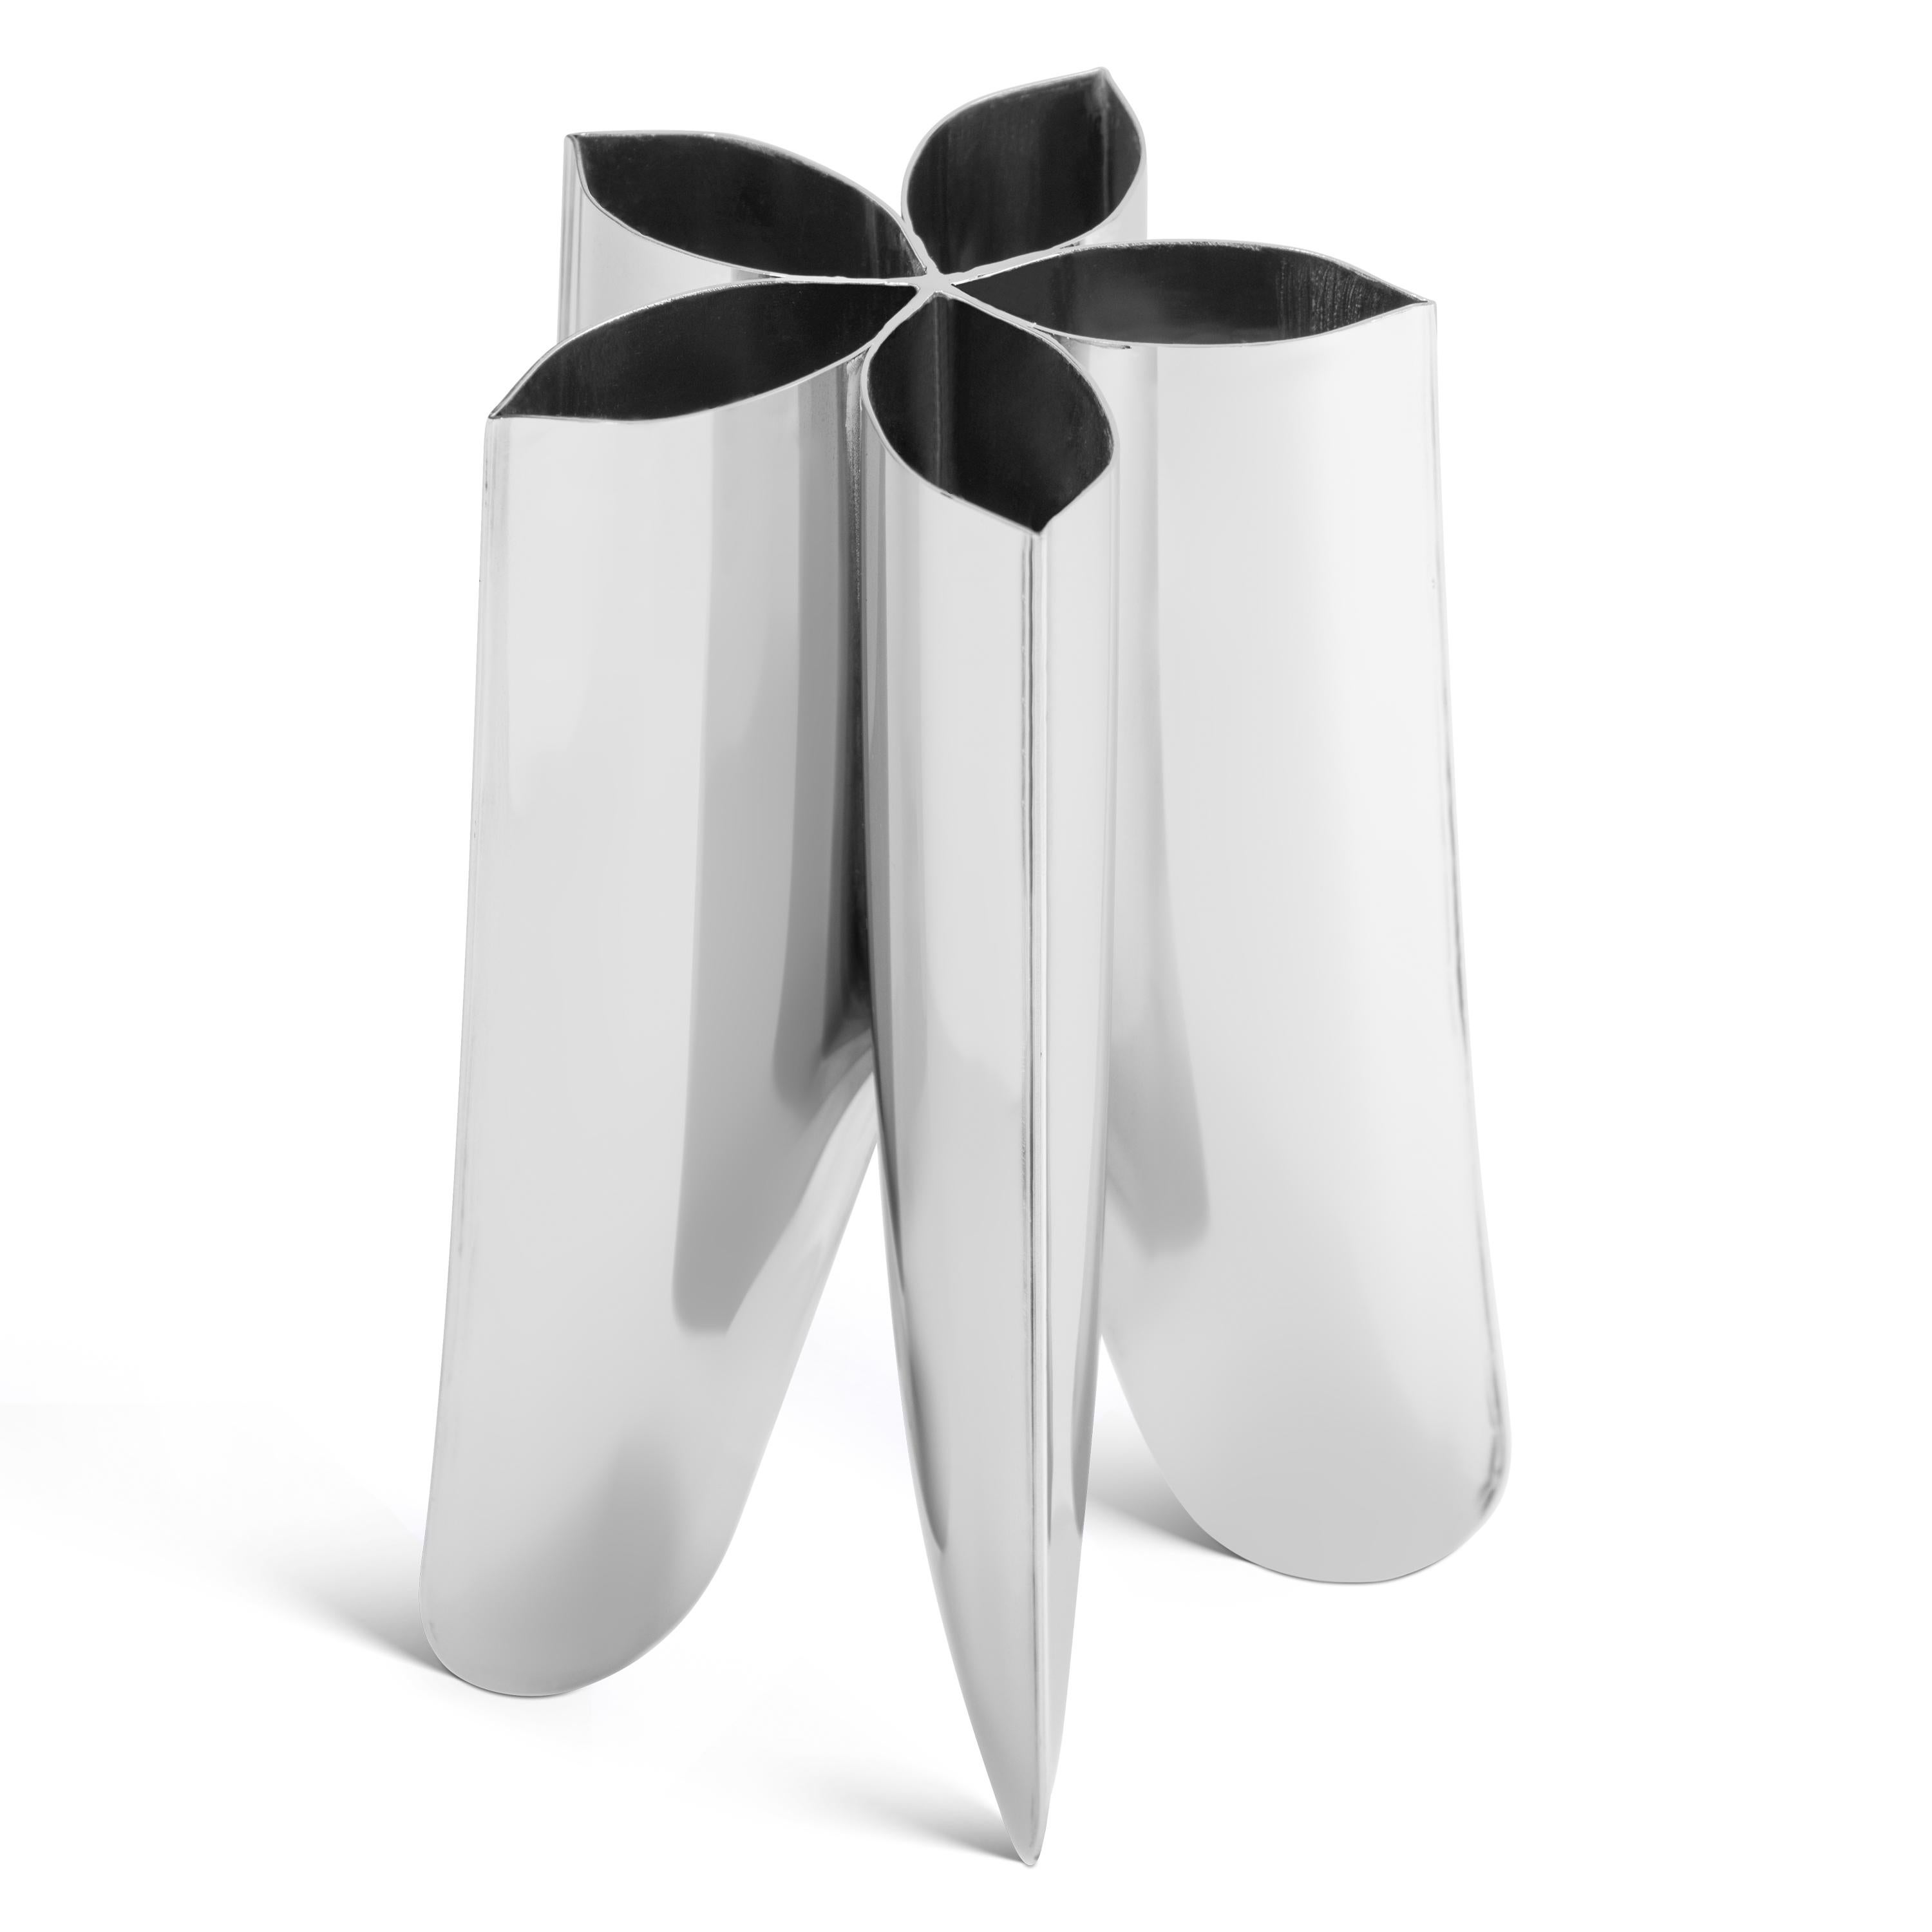 Polished Contemporary Vase, 'Rotation Vase' by Zieta, Small, Stainless Steel For Sale